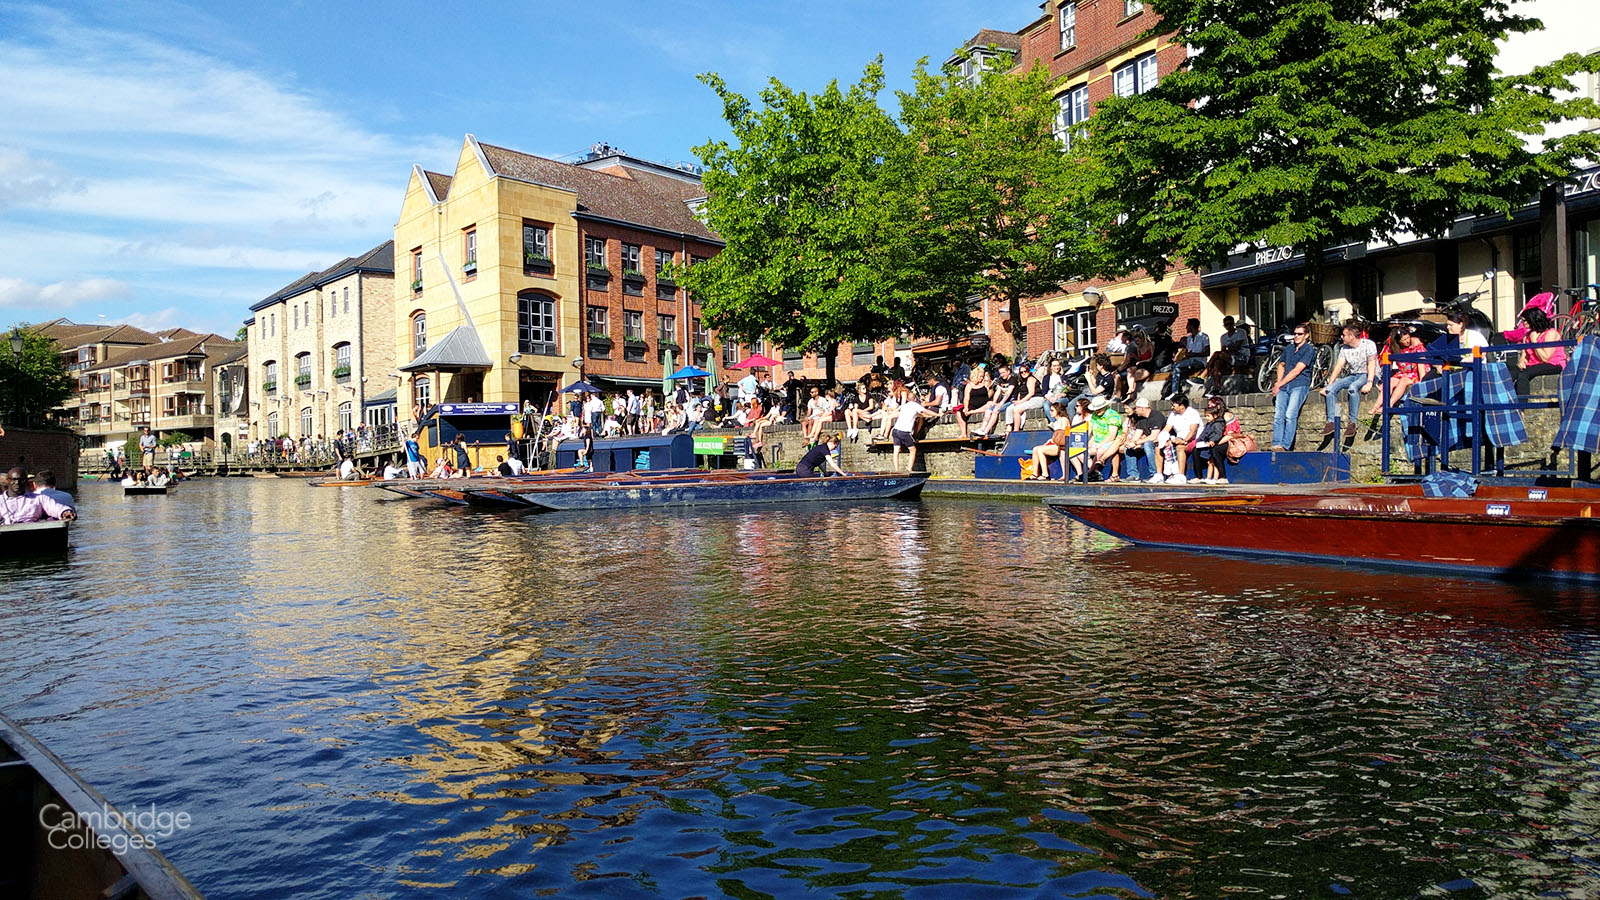 Quayside, Cambridge in the summer months